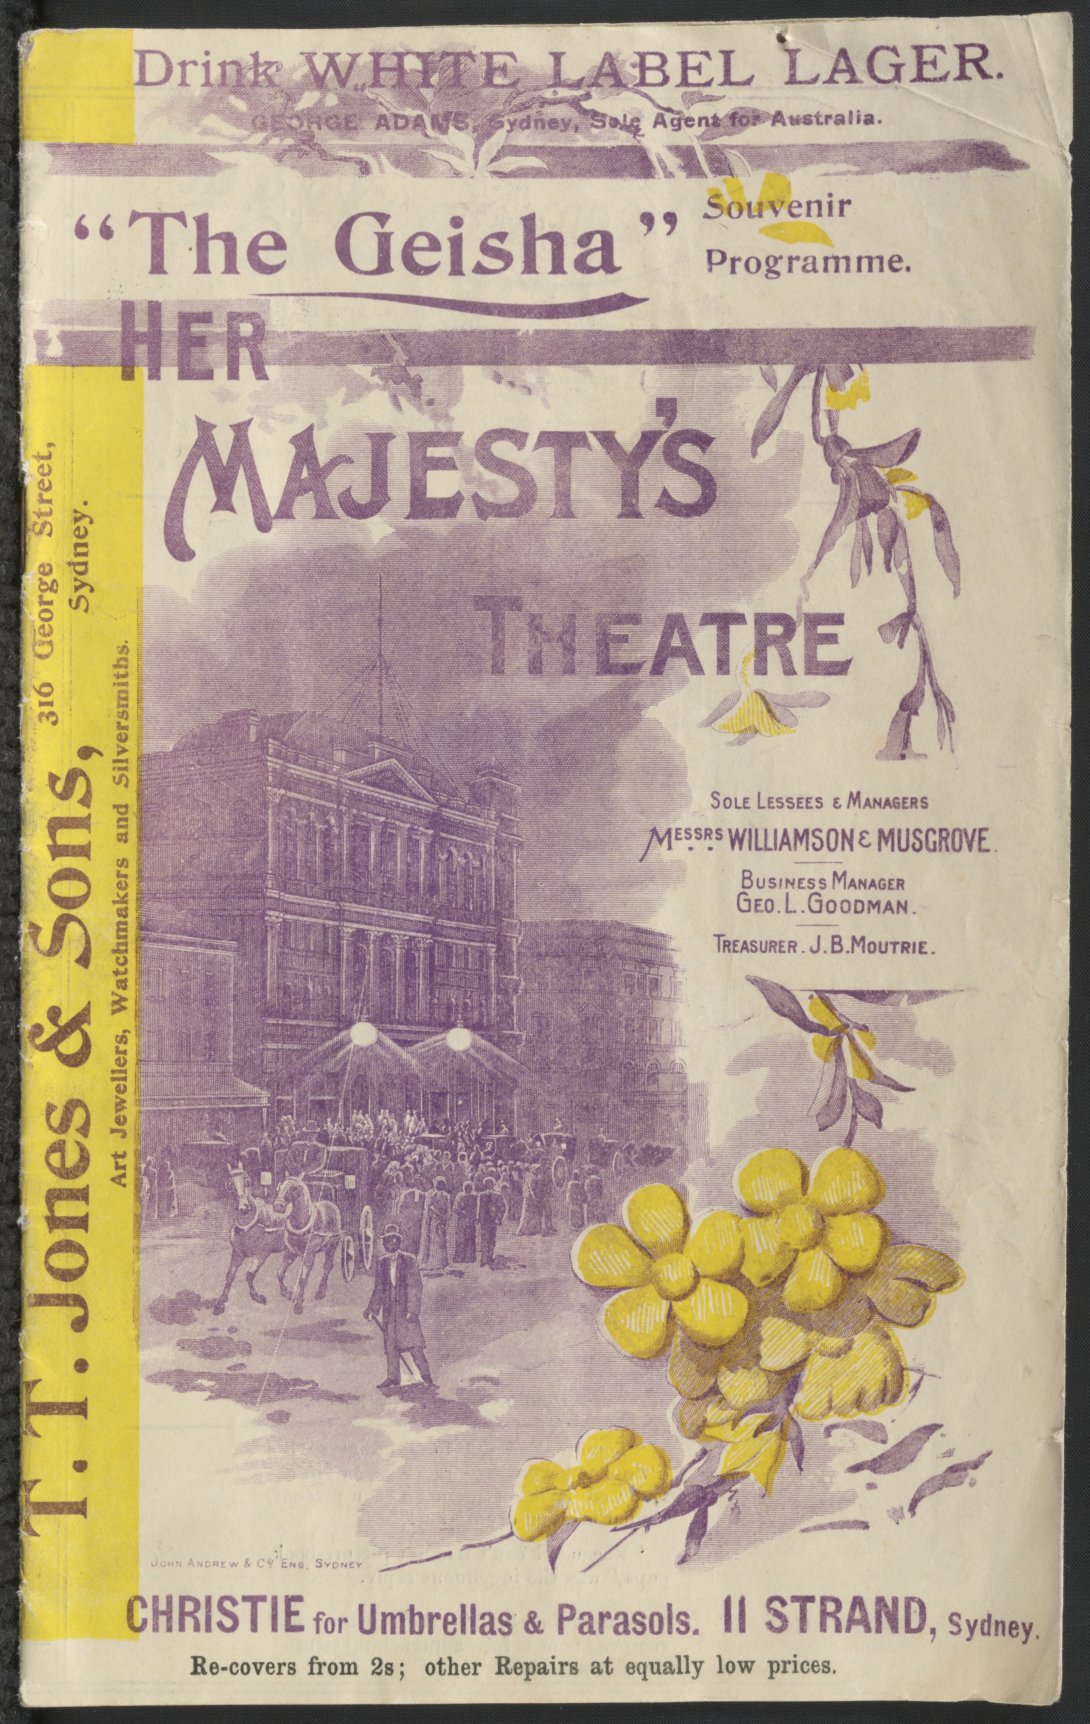 Program advertising a play called The Geisha at Sydney's Her Majesty's Theatre